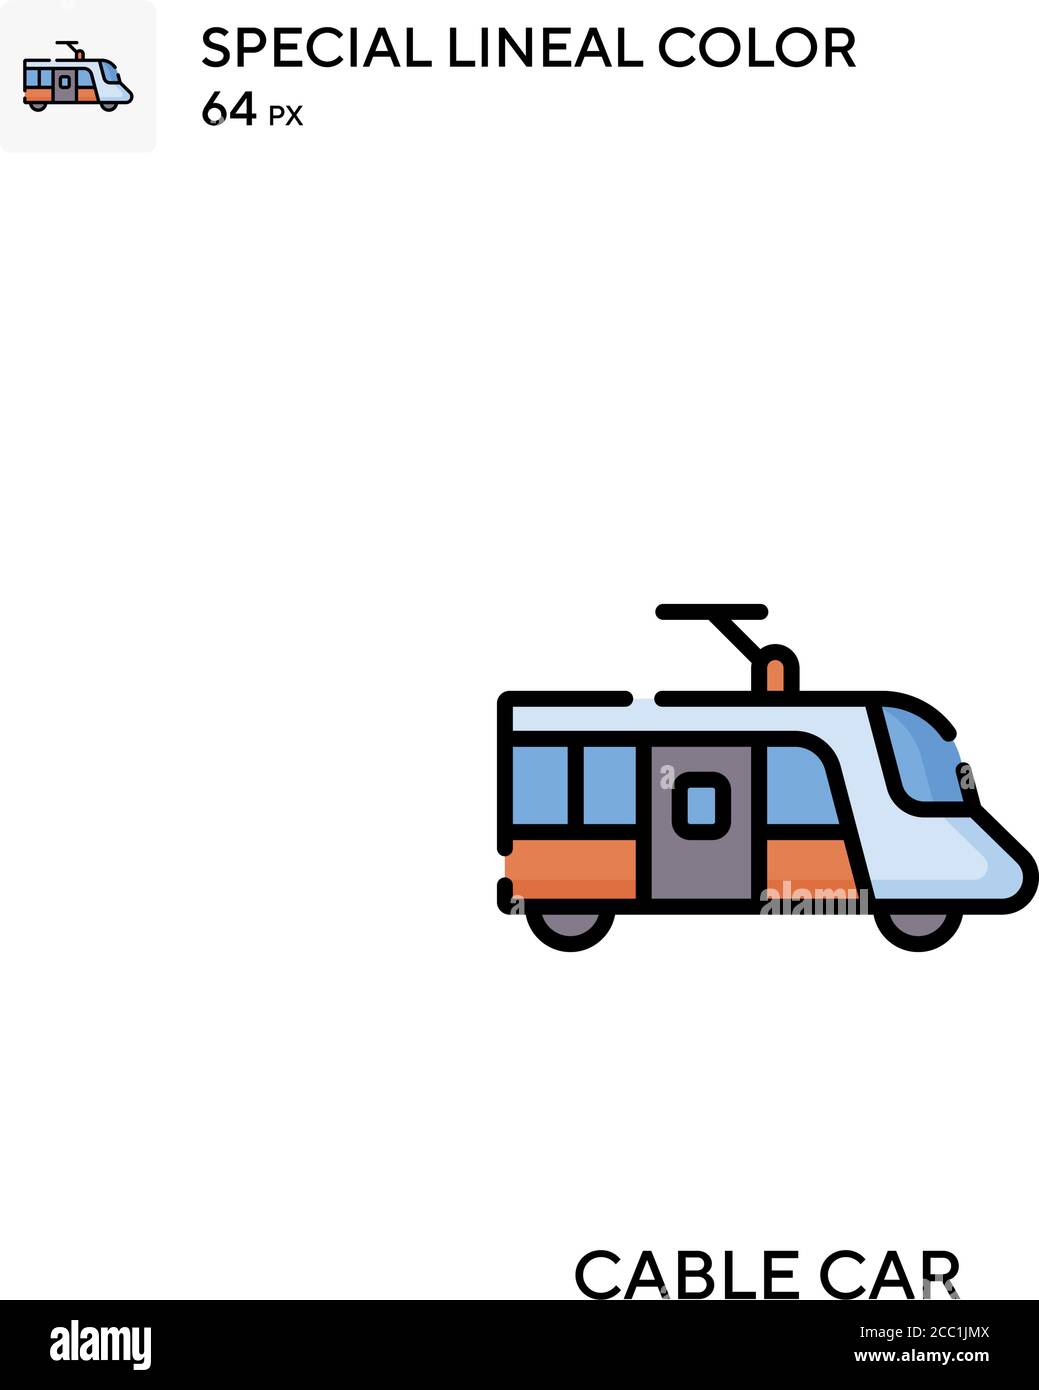 Cable car Special lineal color vector icon. Cable car icons for your business project Stock Vector